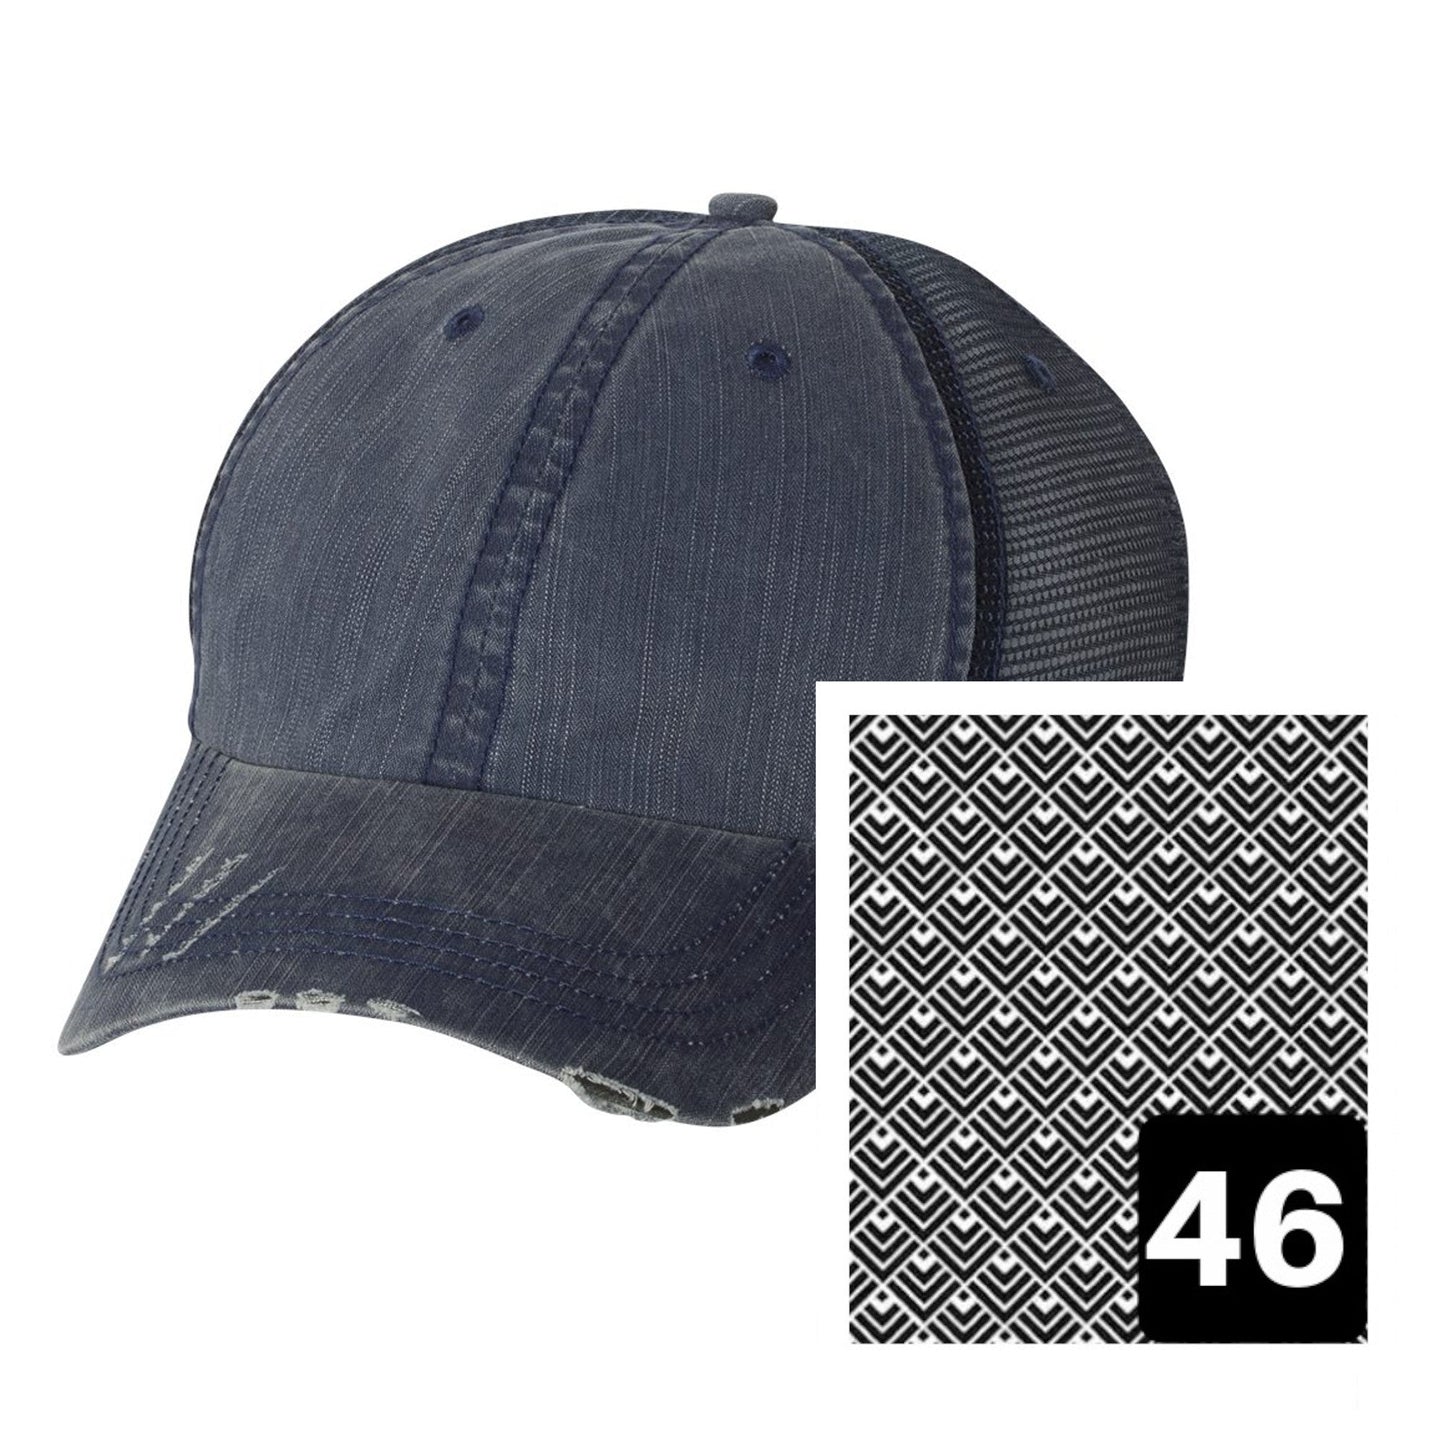 Georgia Hat | Navy Distressed Trucker Cap | Many Fabric Choices